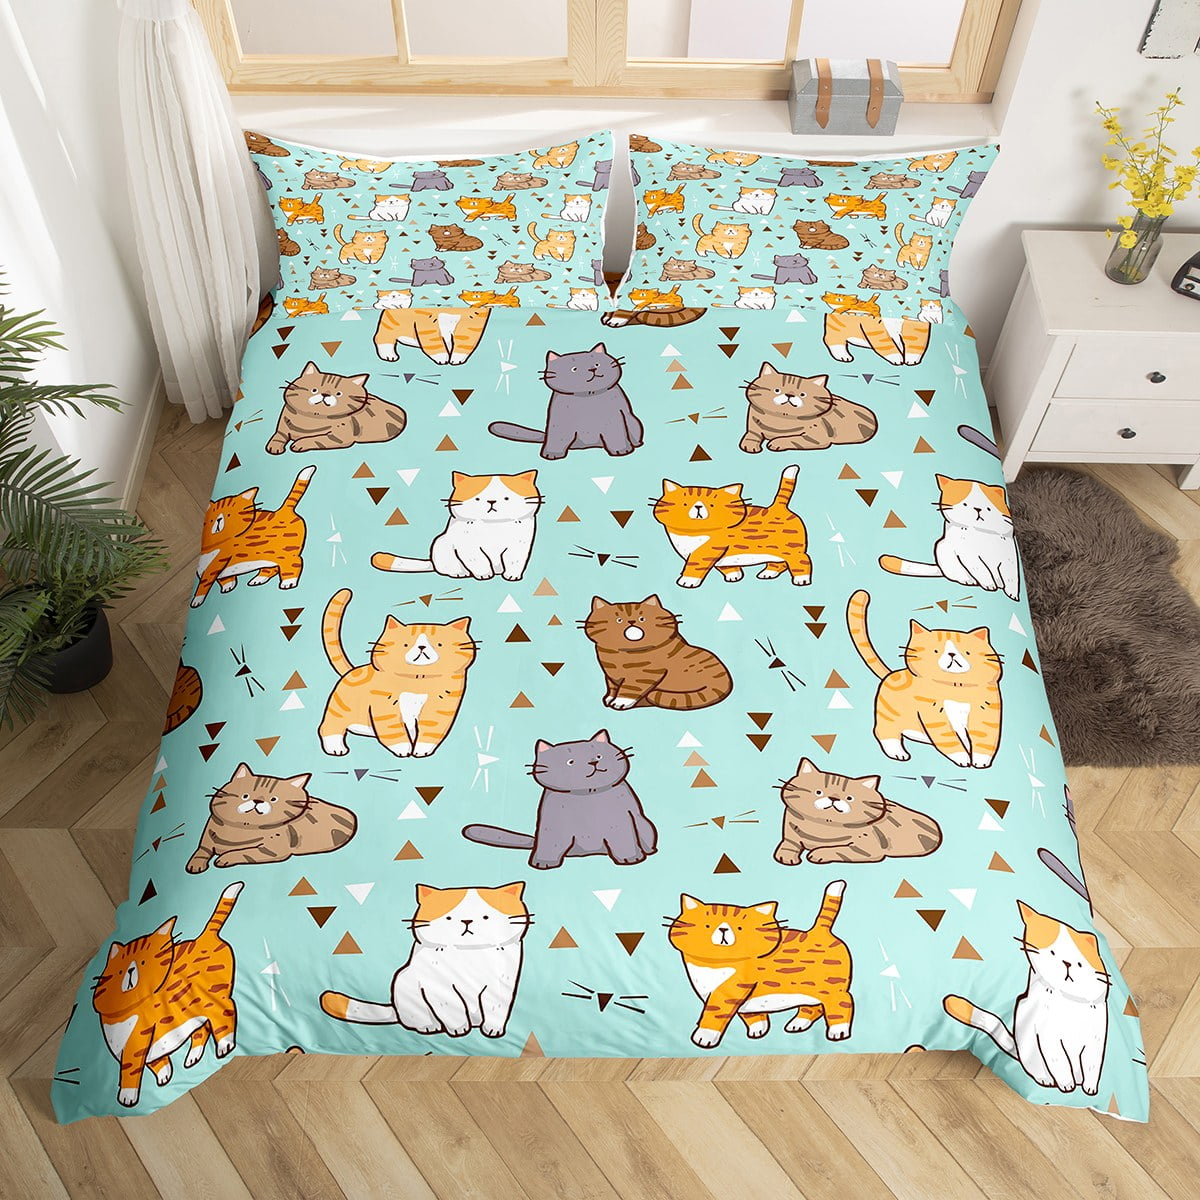 Stay positive with Cute Cartoon Cat Bedding Set - cat sheets queen –  Meowgicians™